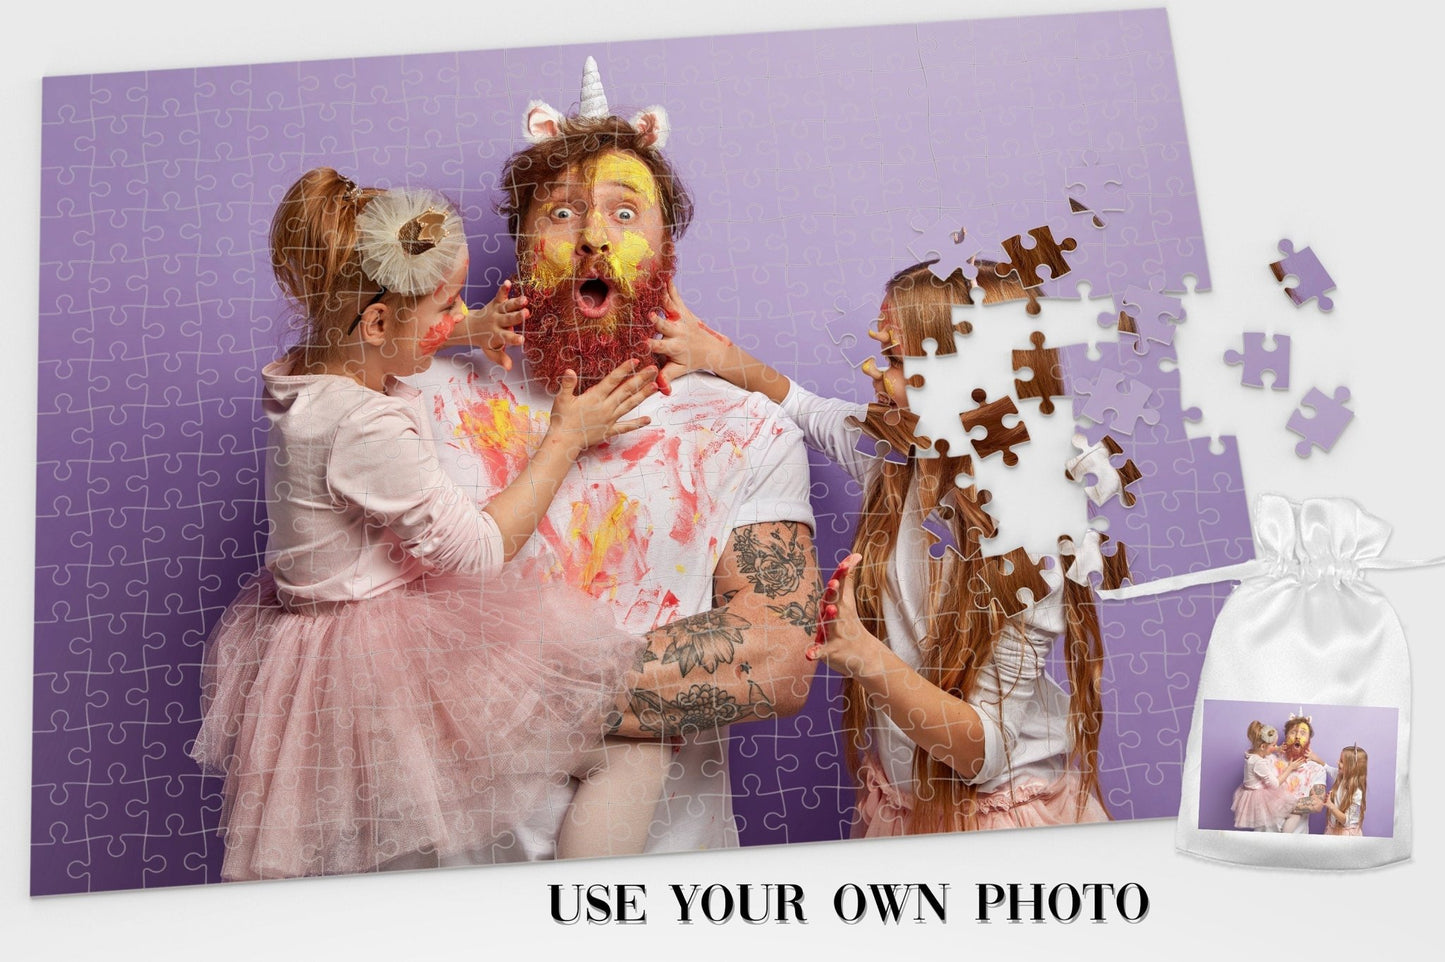 Fathers Day Gift from Kids Unique Father's Day Gift Photo Puzzle Kids Personalized Photo Puzzle Dad Birthday Family Portrait Jigsaw Photo - Squishy Cheeks